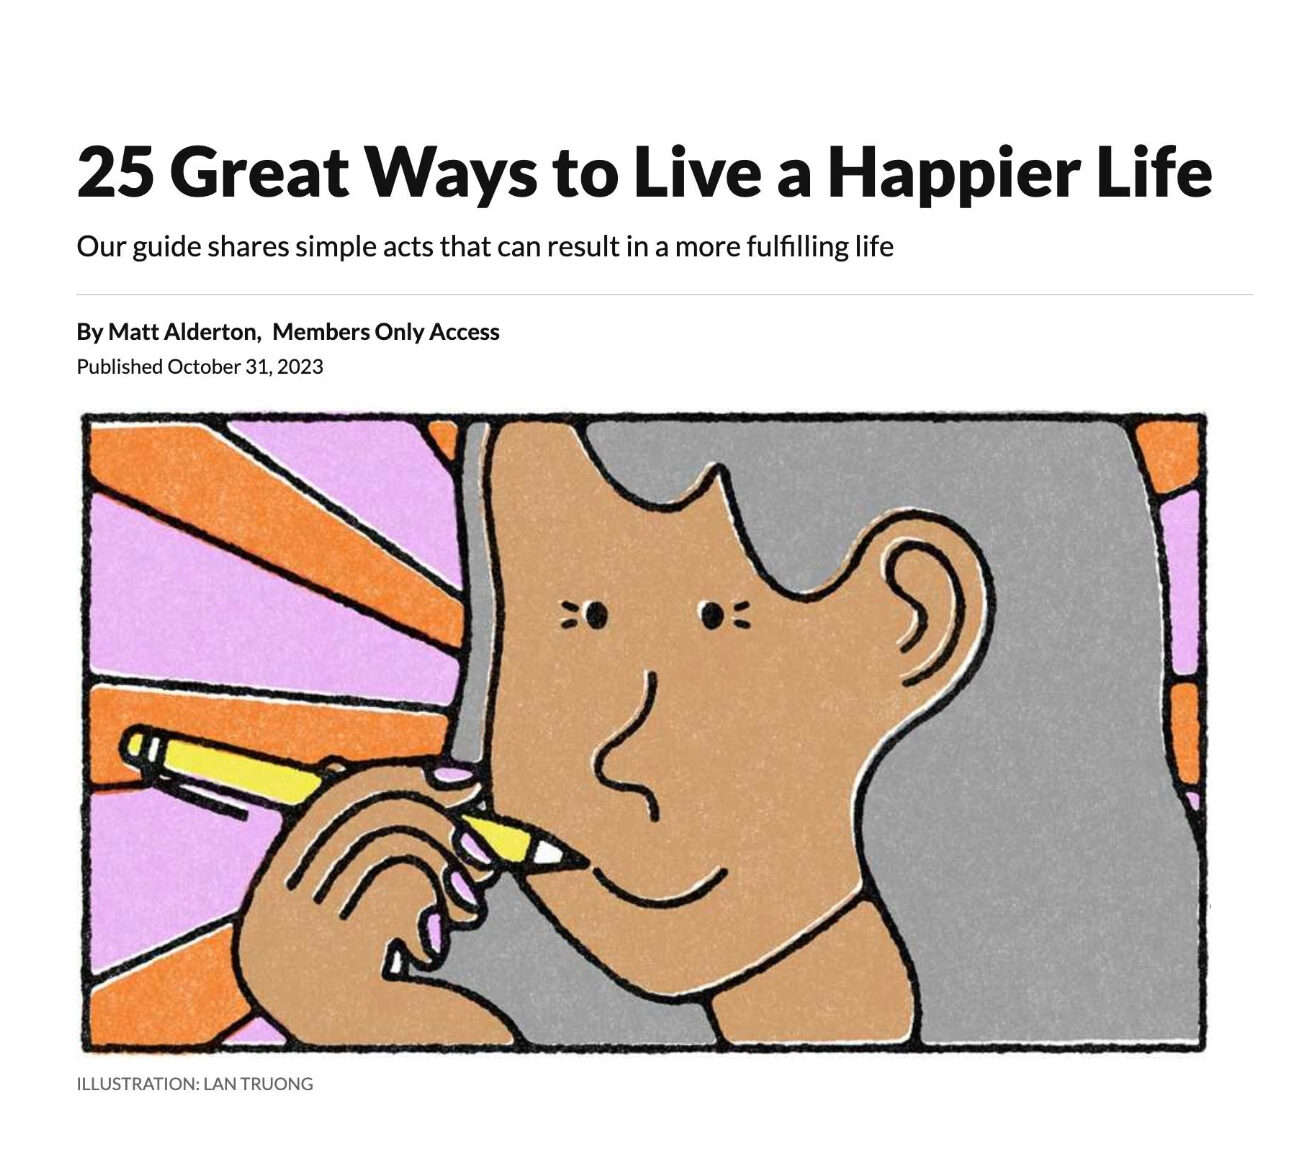 AARP: "25 Great Ways to Live a Happier Life"